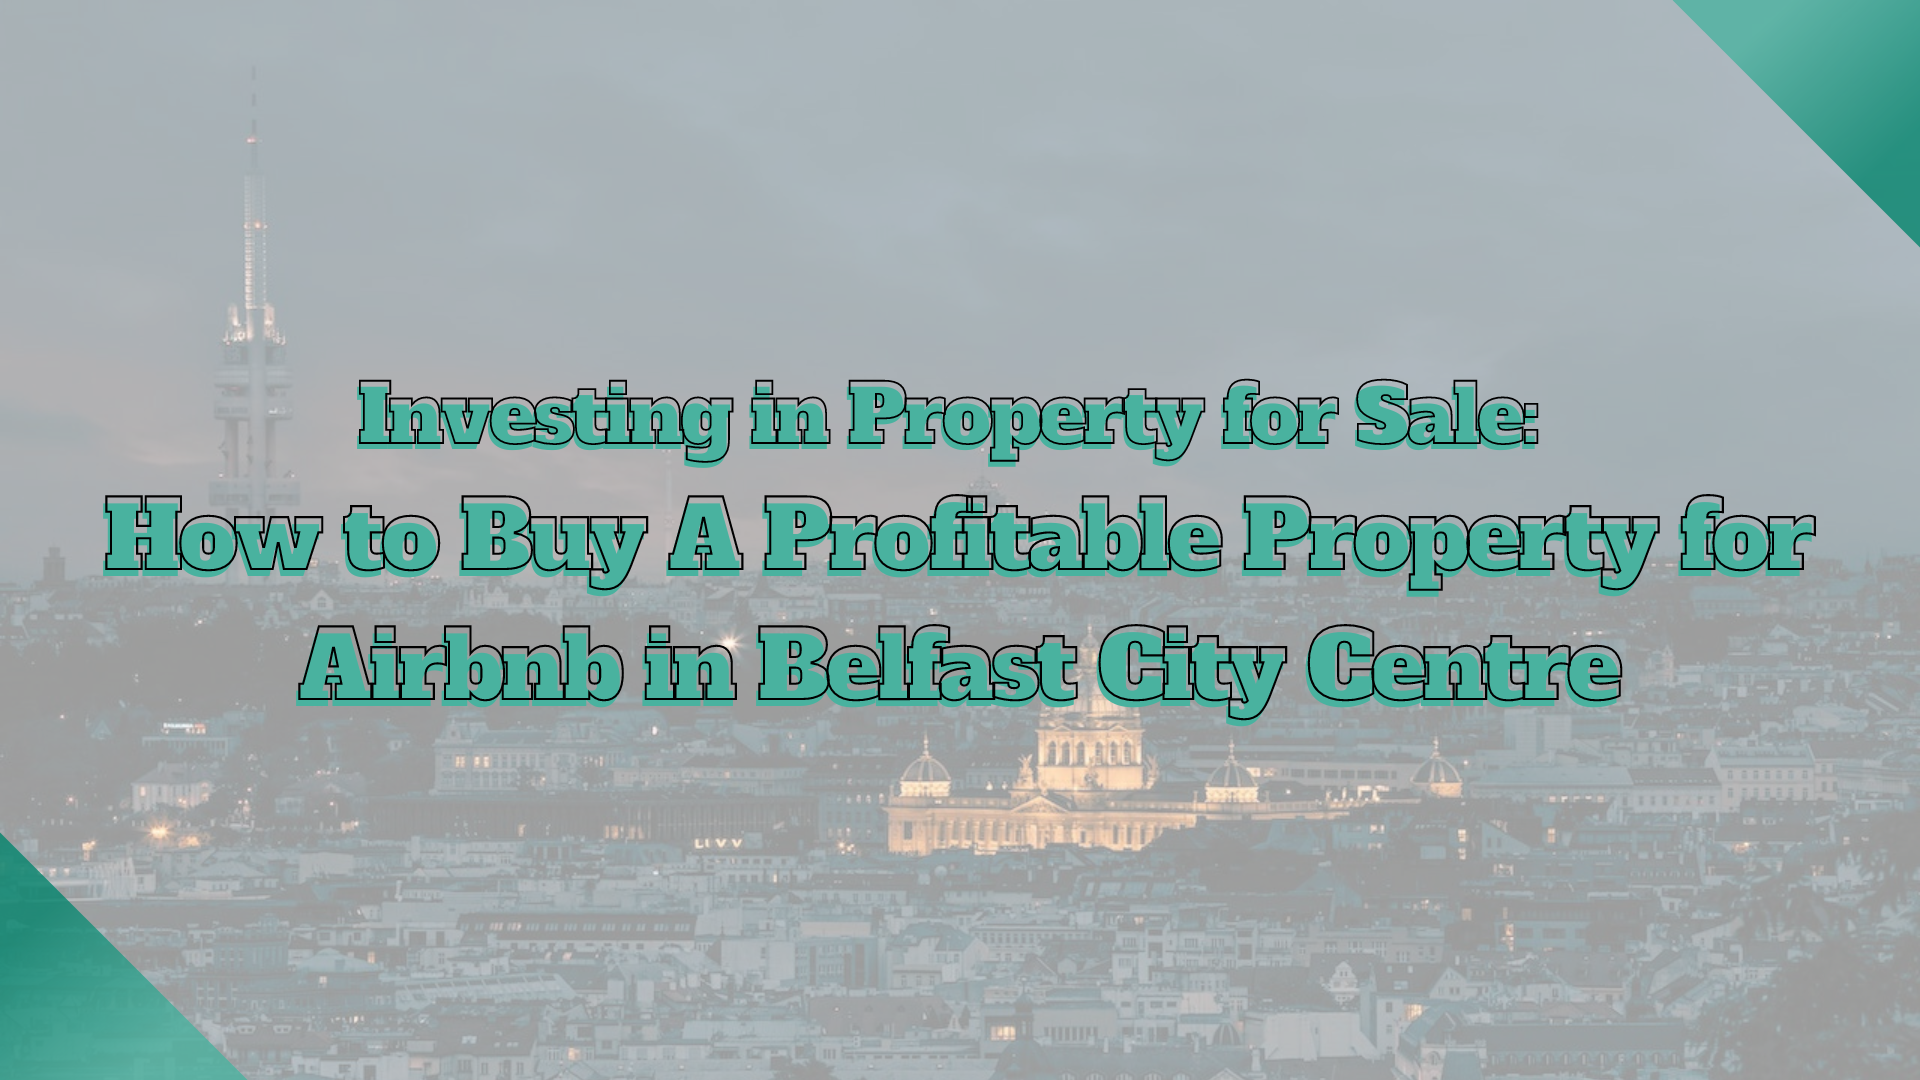 airbnb property for sale belfast city centre